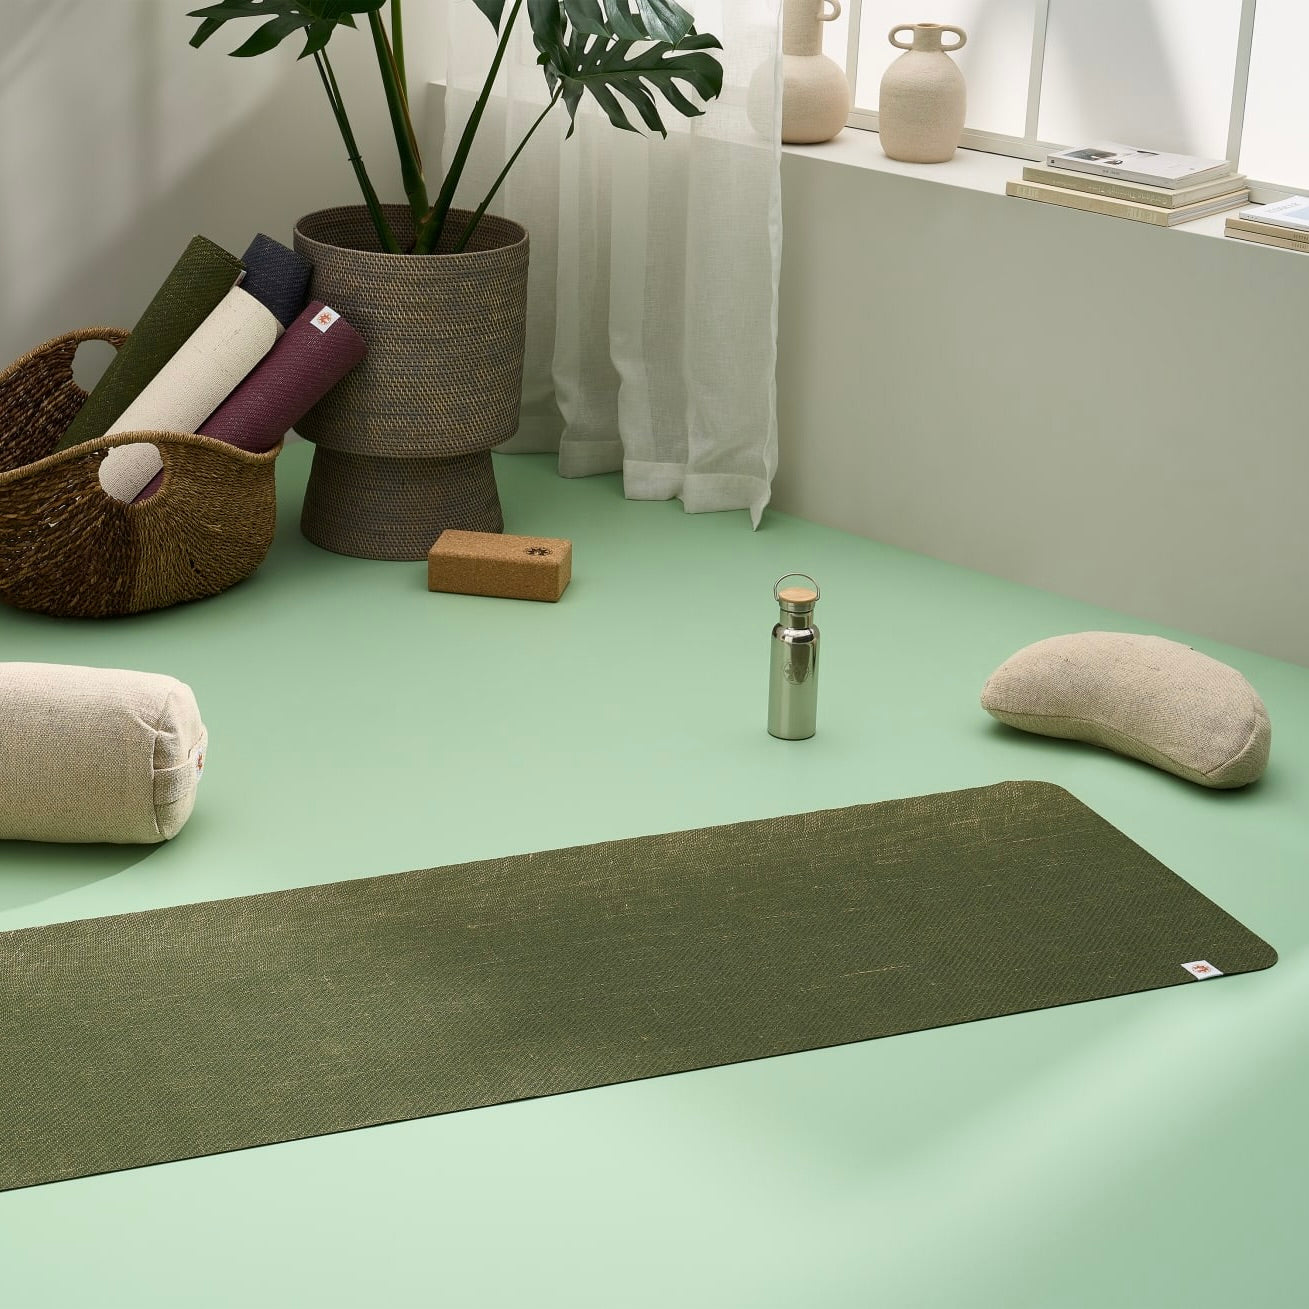 Yoga Mat Pro Eco made from Jute 183 x 60 cm, 4 mm